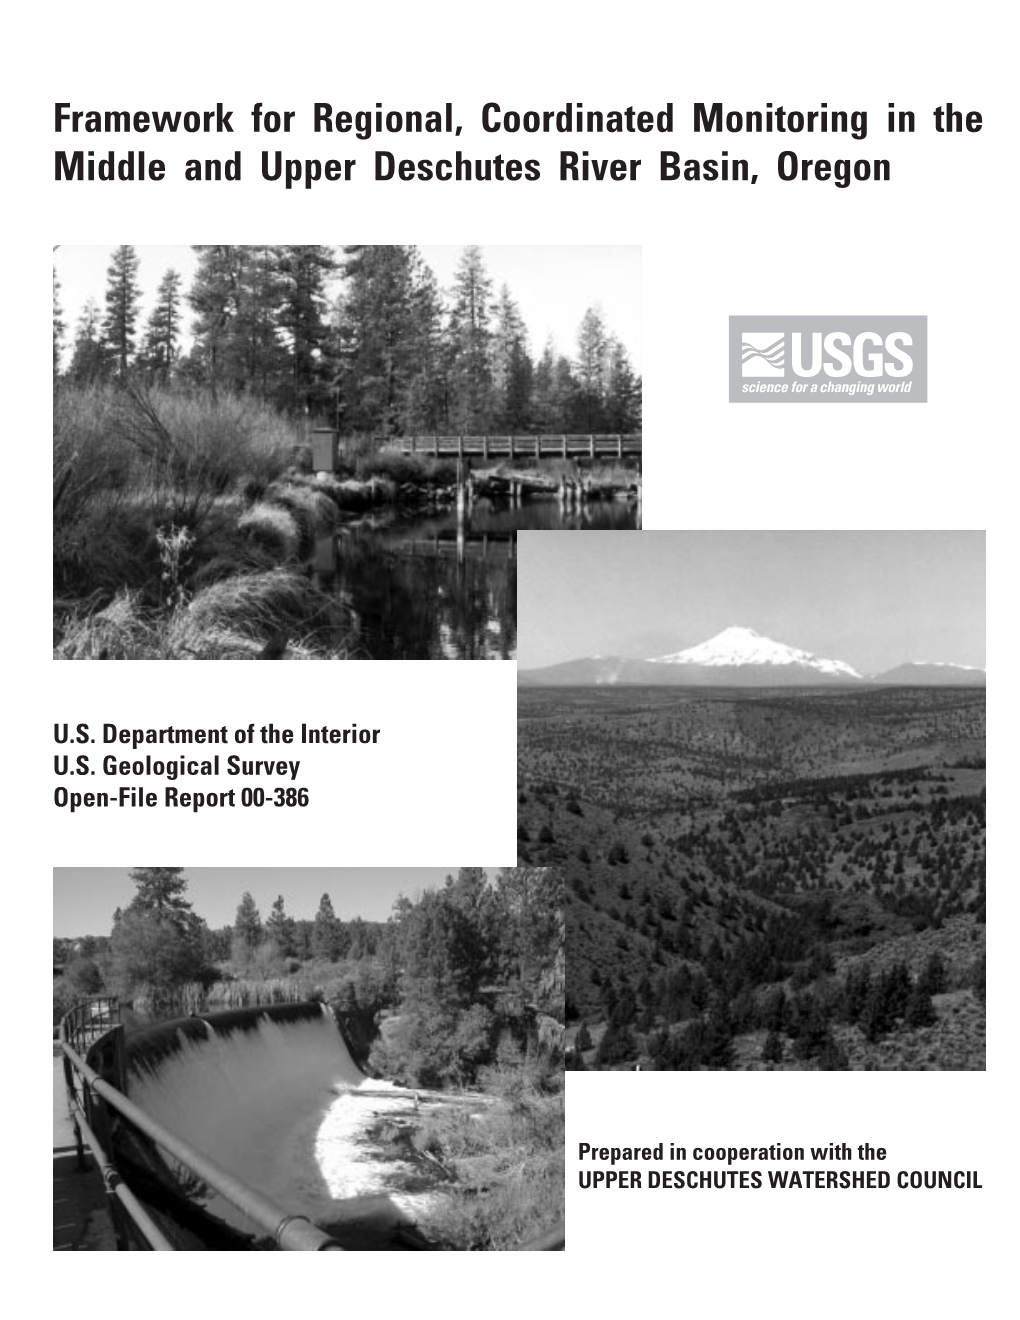 Framework for Regional, Coordinated Monitoring in the Middle and Upper Deschutes River Basin, Oregon